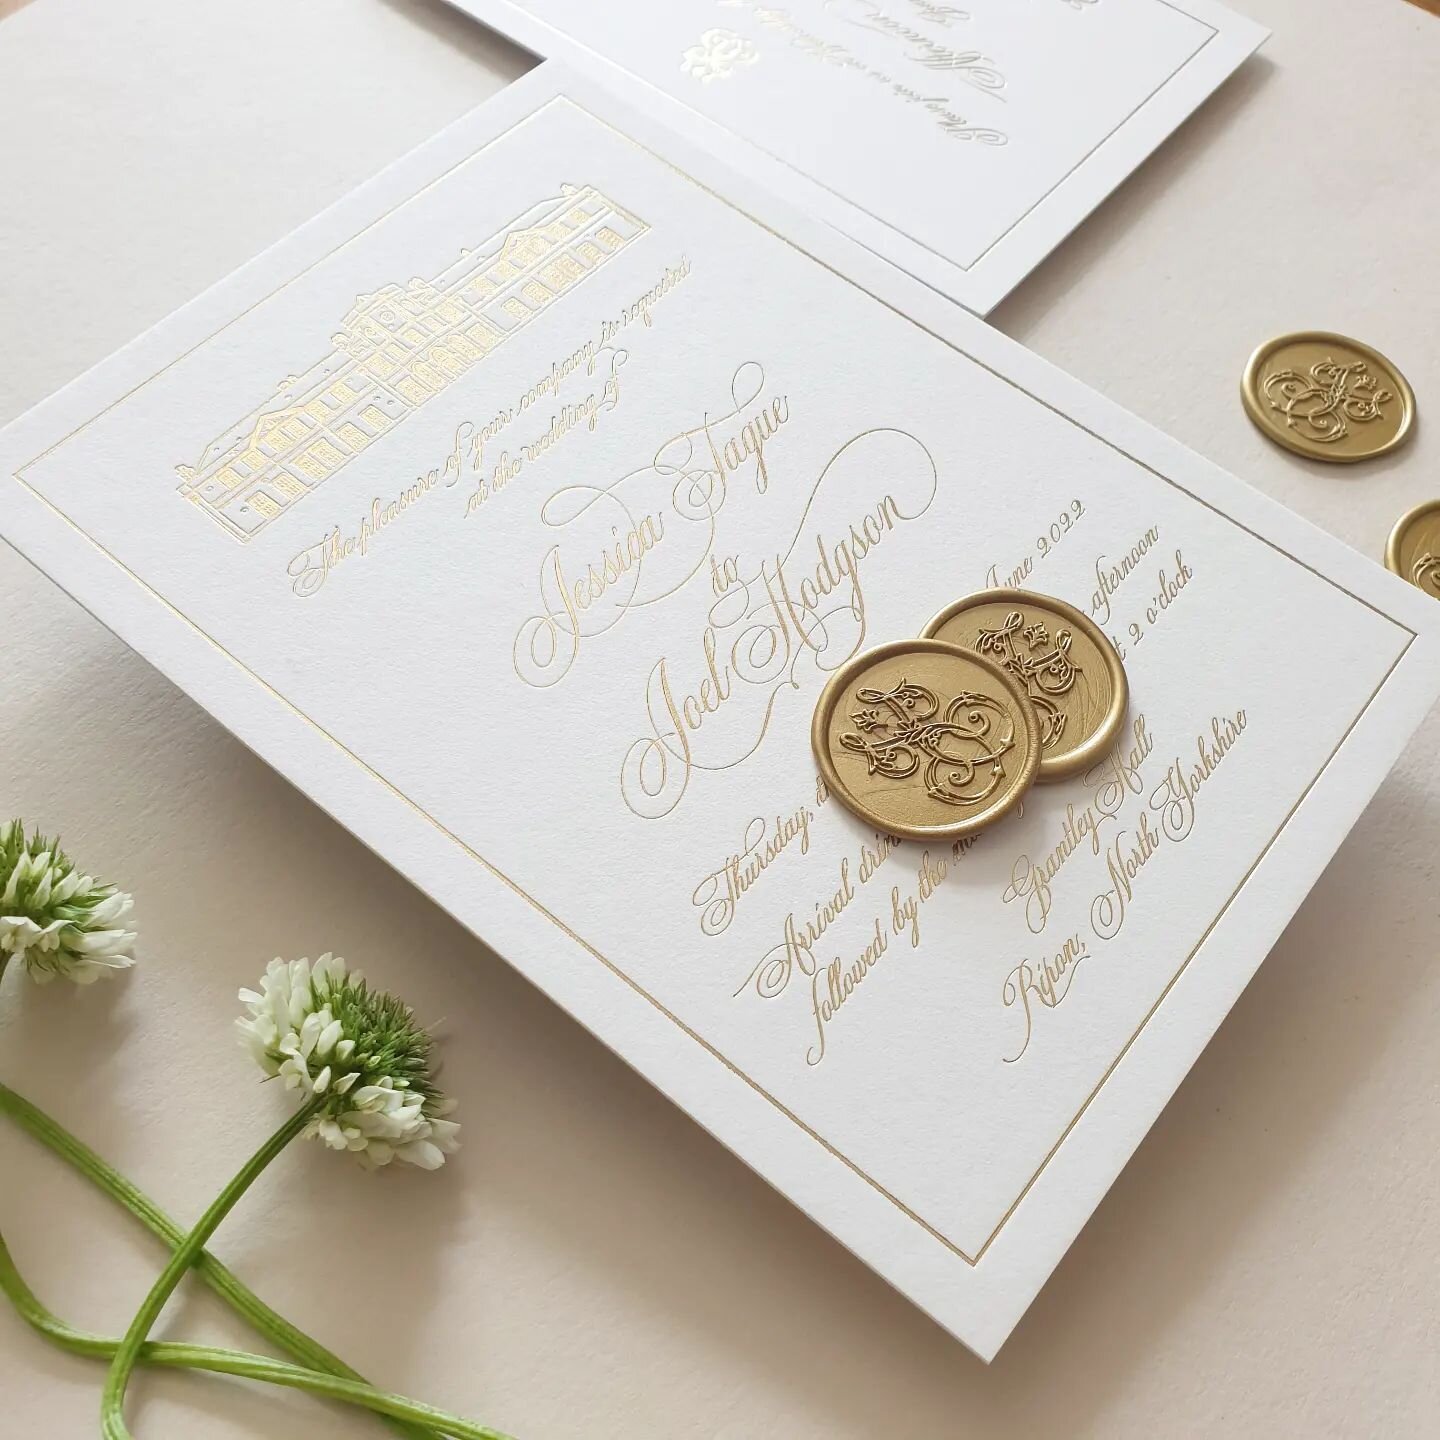 Custom Suite |

One very classy, custom invitation suite for a Grantley Hall wedding. Complete with the most intricate wax seals I've ever made and the most stunning venue illustration by @lilianroseprints who I will always recommend if I can't fit o